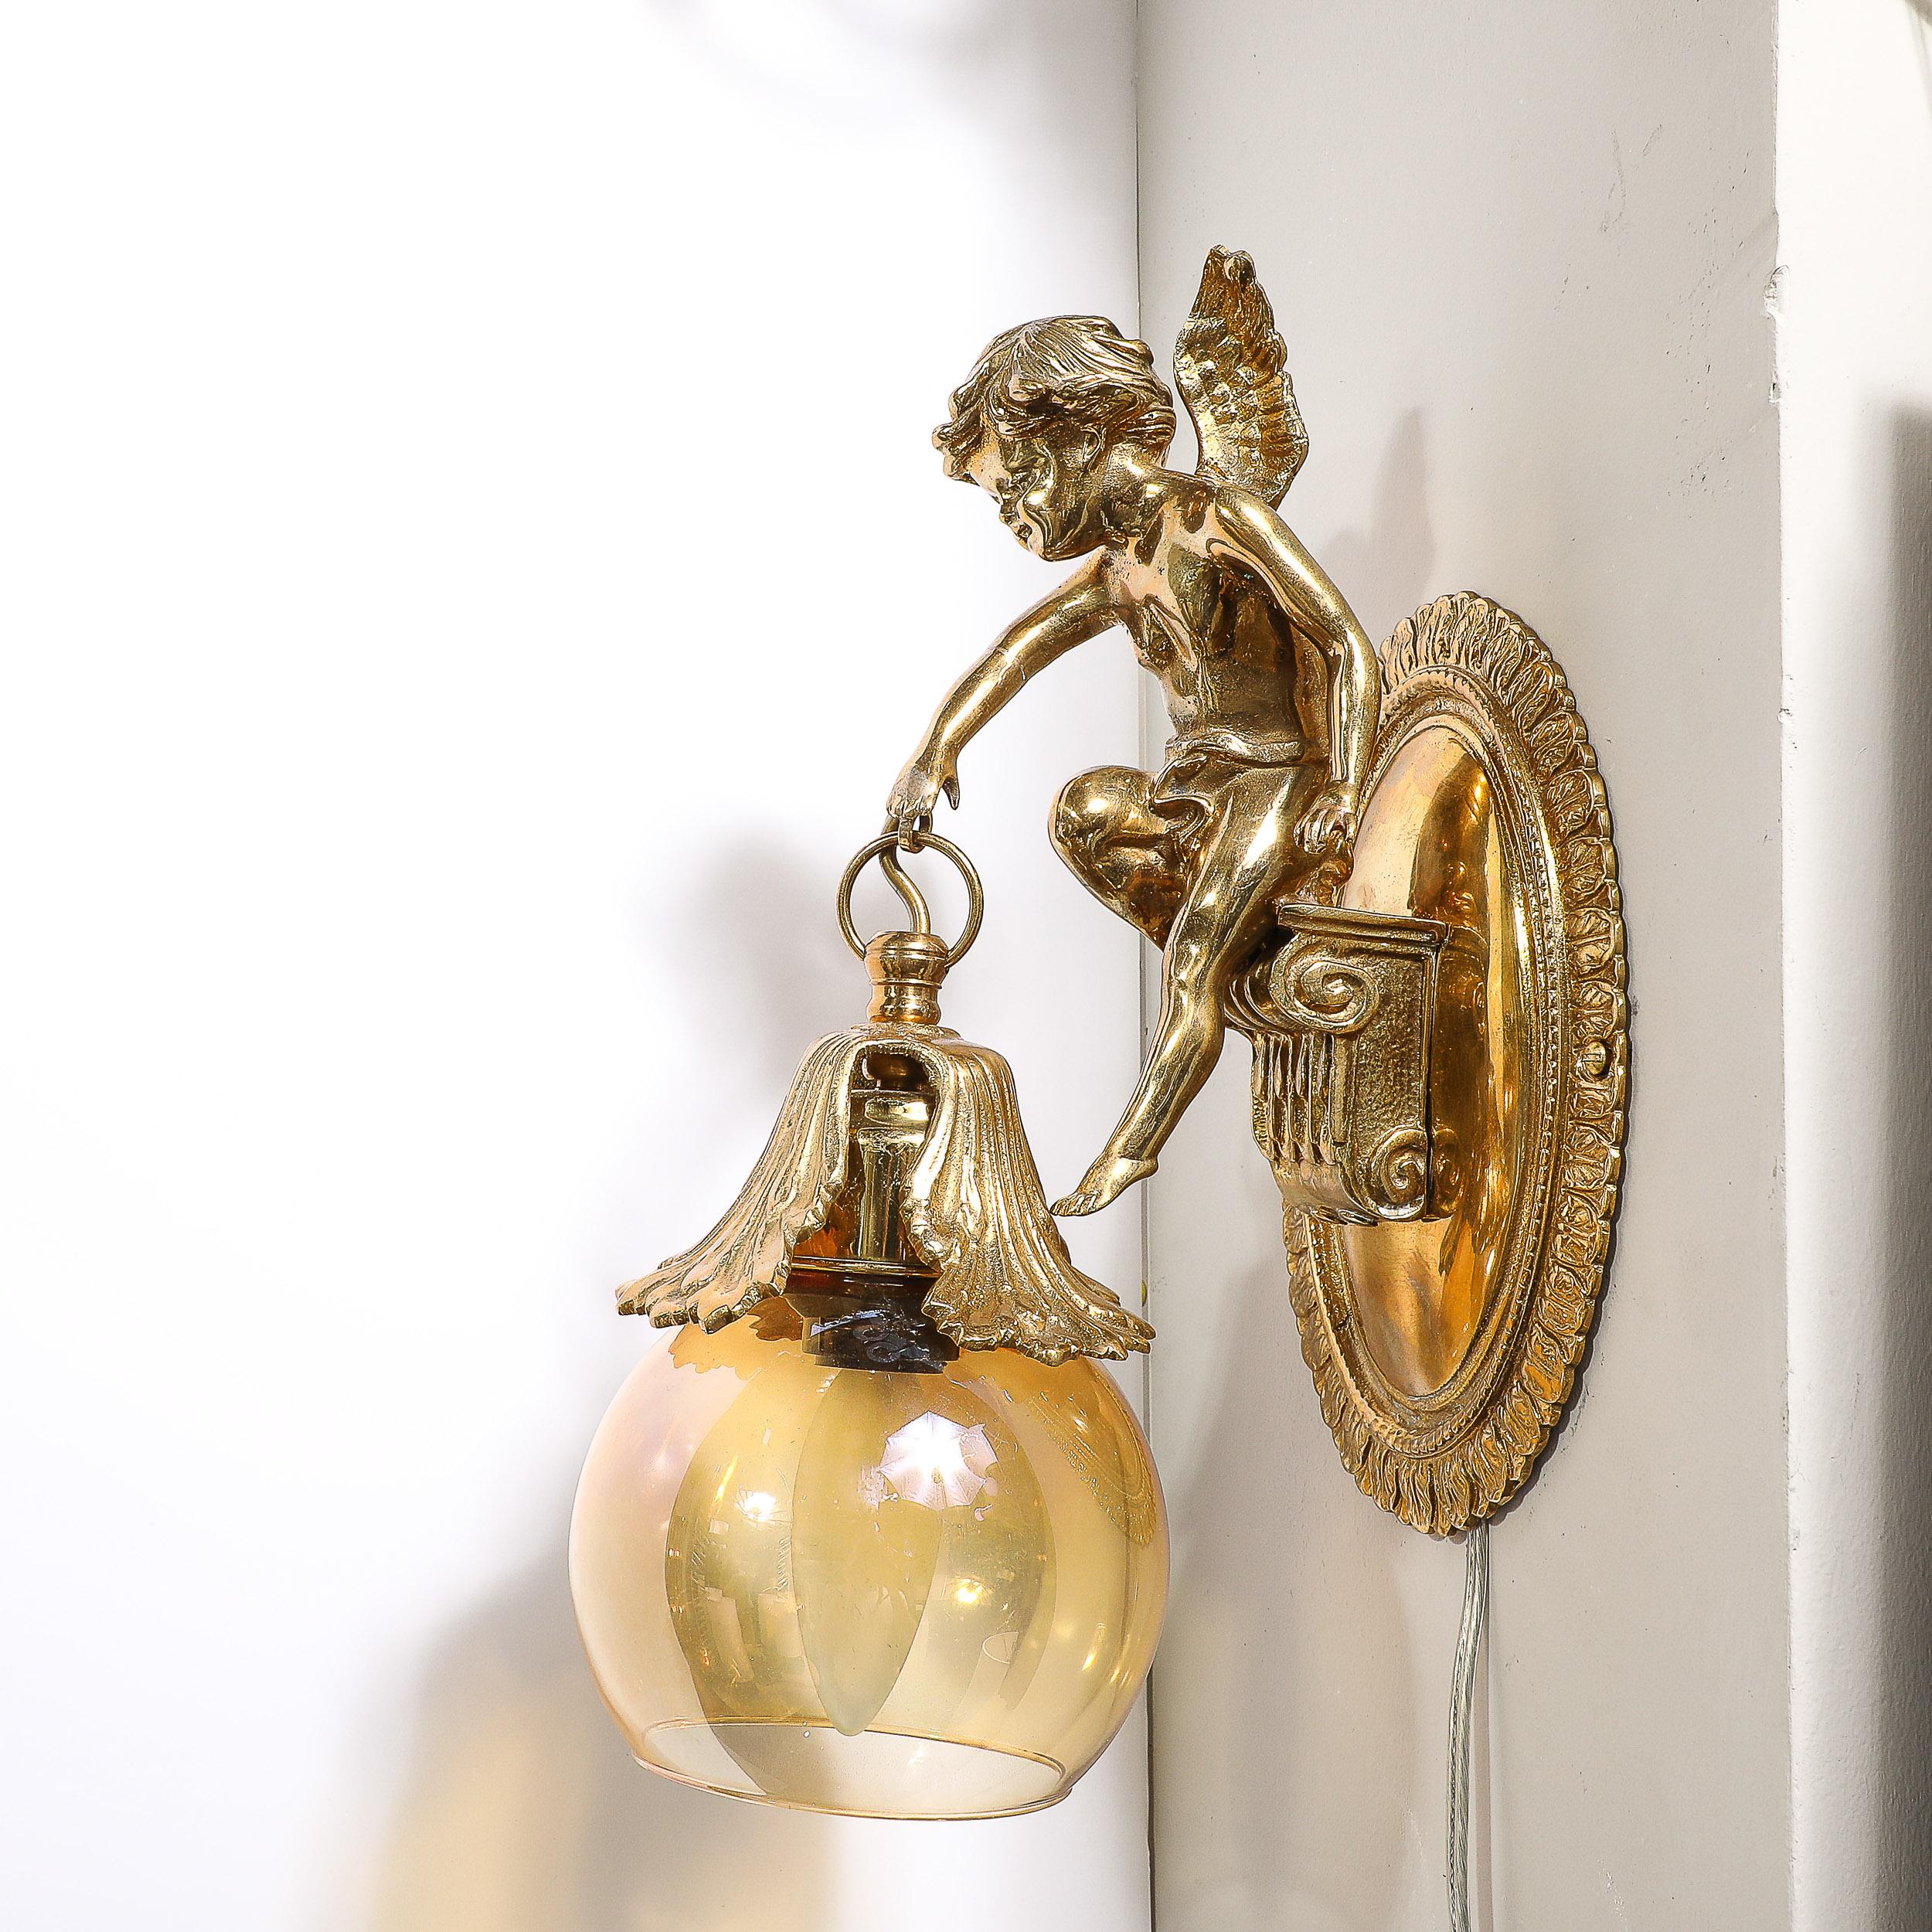 Pair of Neoclassical Cherub Sconces in Antique Brass w/ Smoked Amber Shades For Sale 9